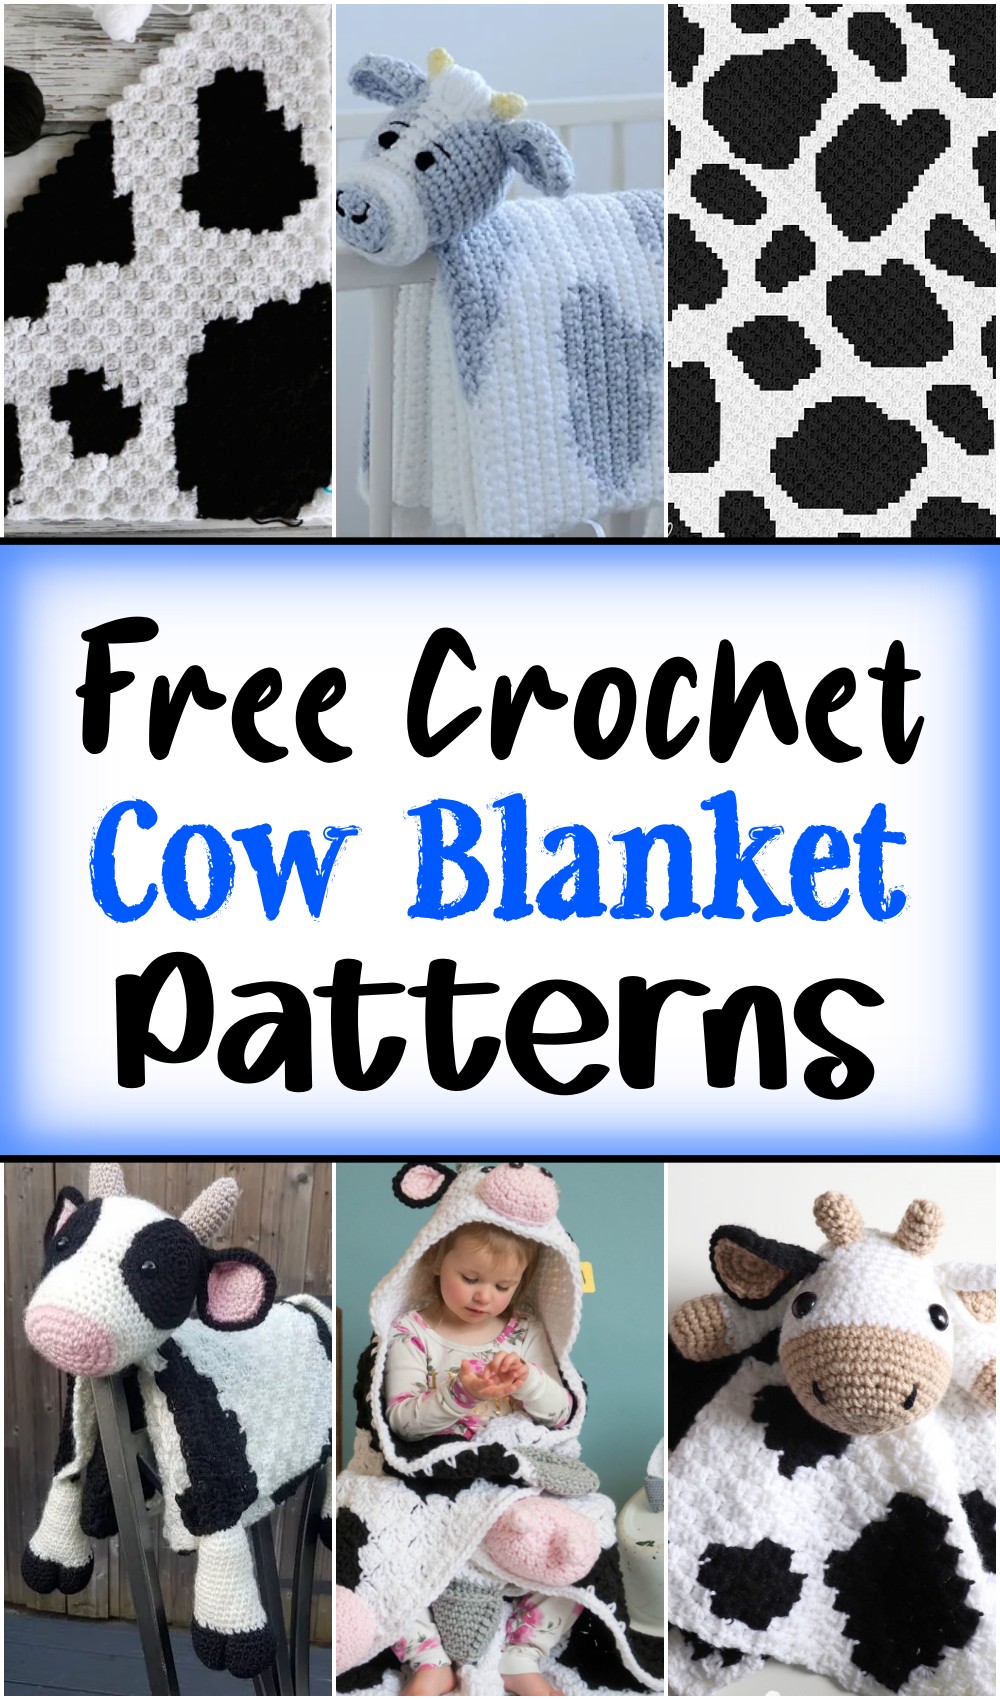 6 Crochet Cow Blanket Patterns For Adorable Wraps